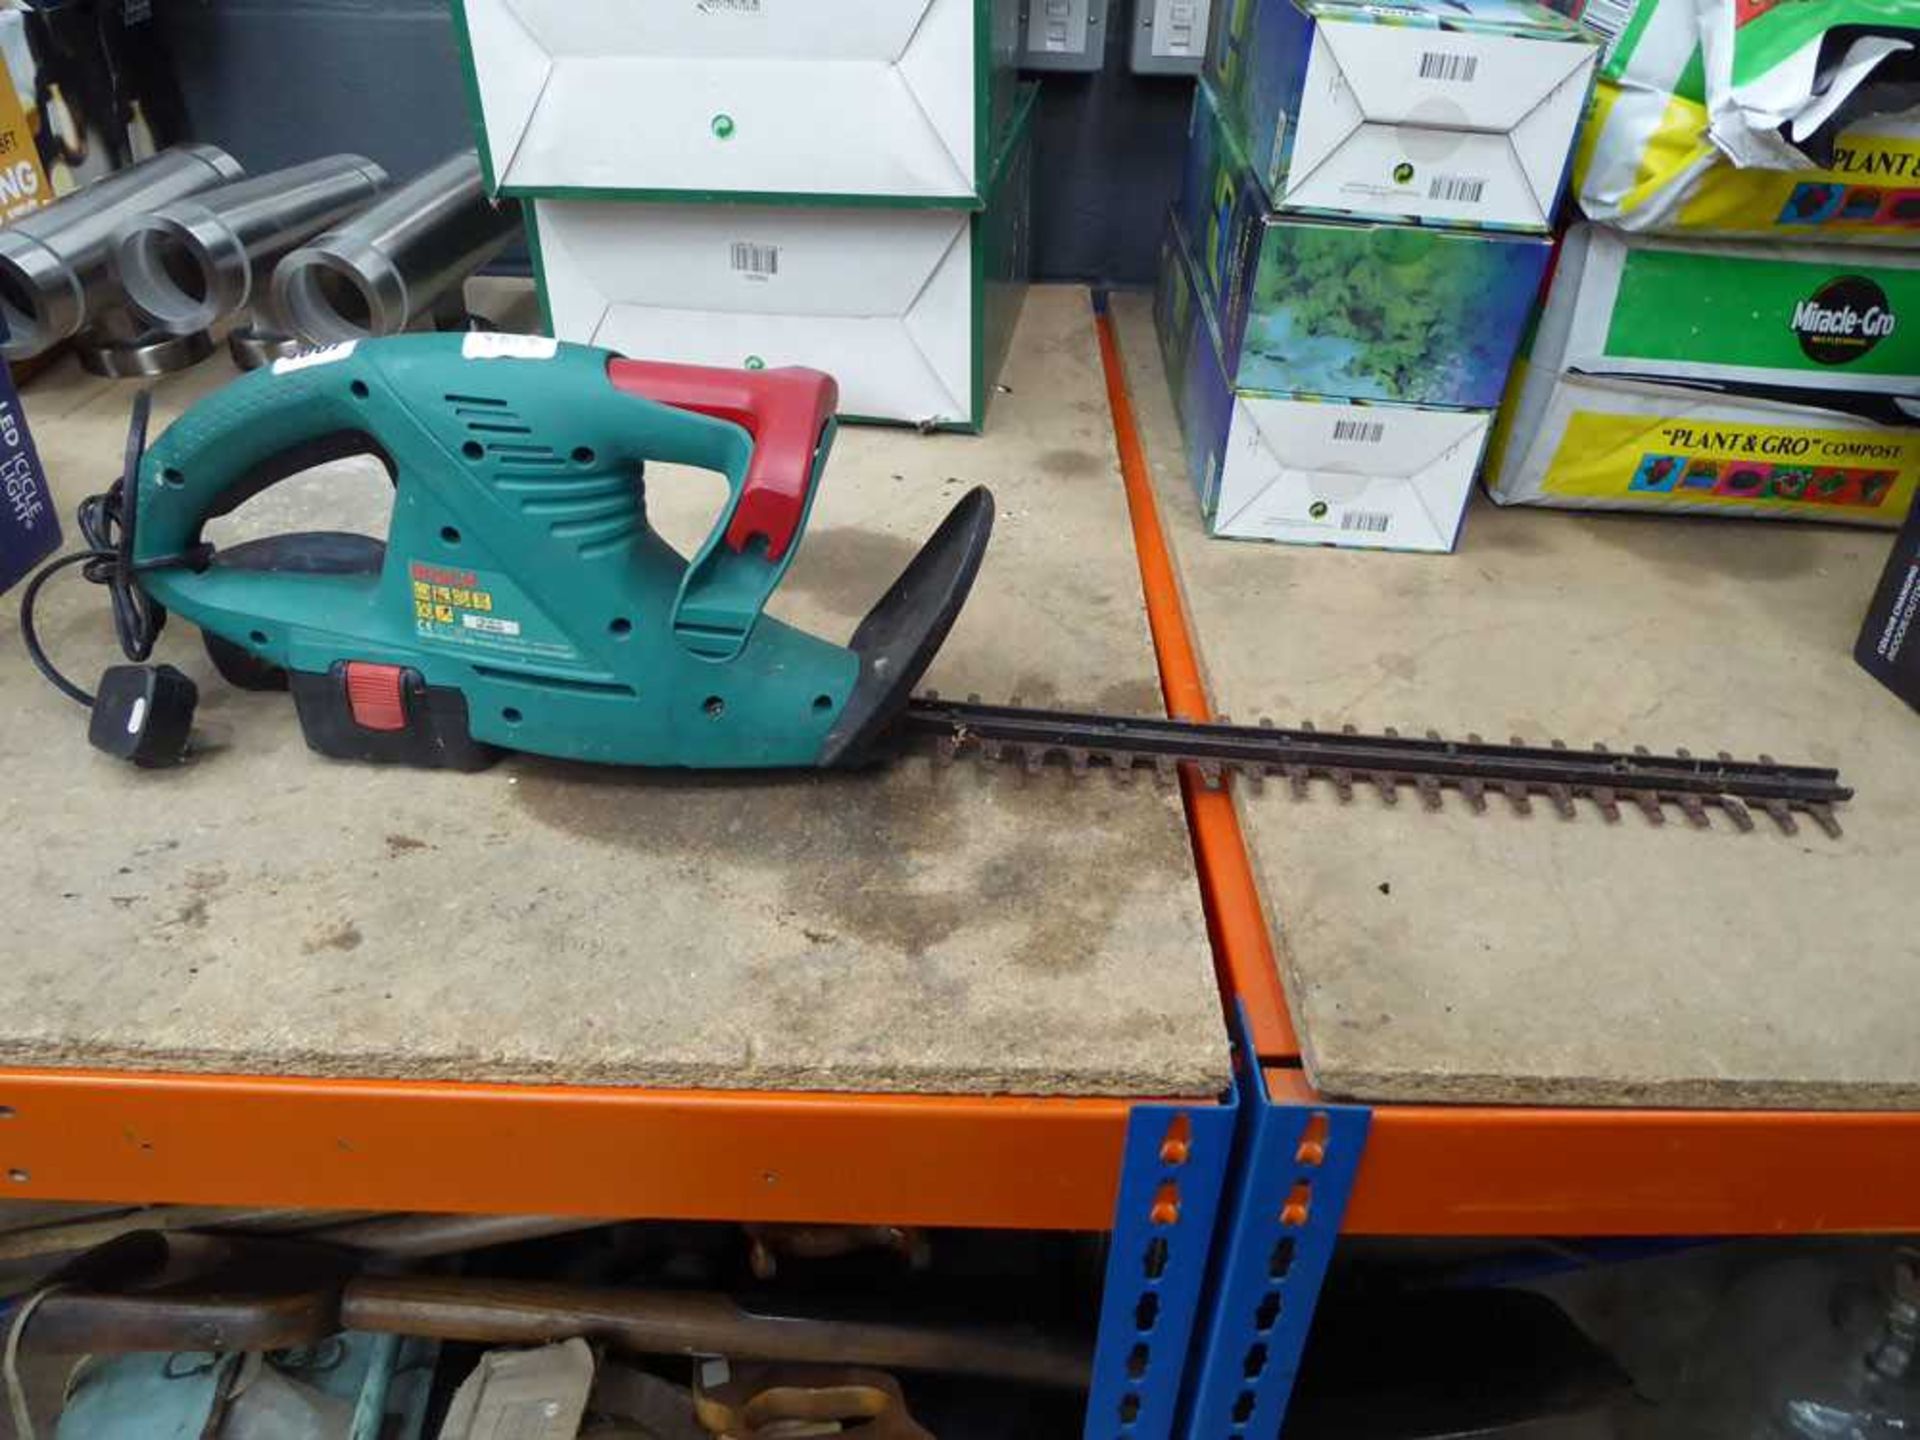 Bosch battery powered hedgecutter with 1 battery and charger